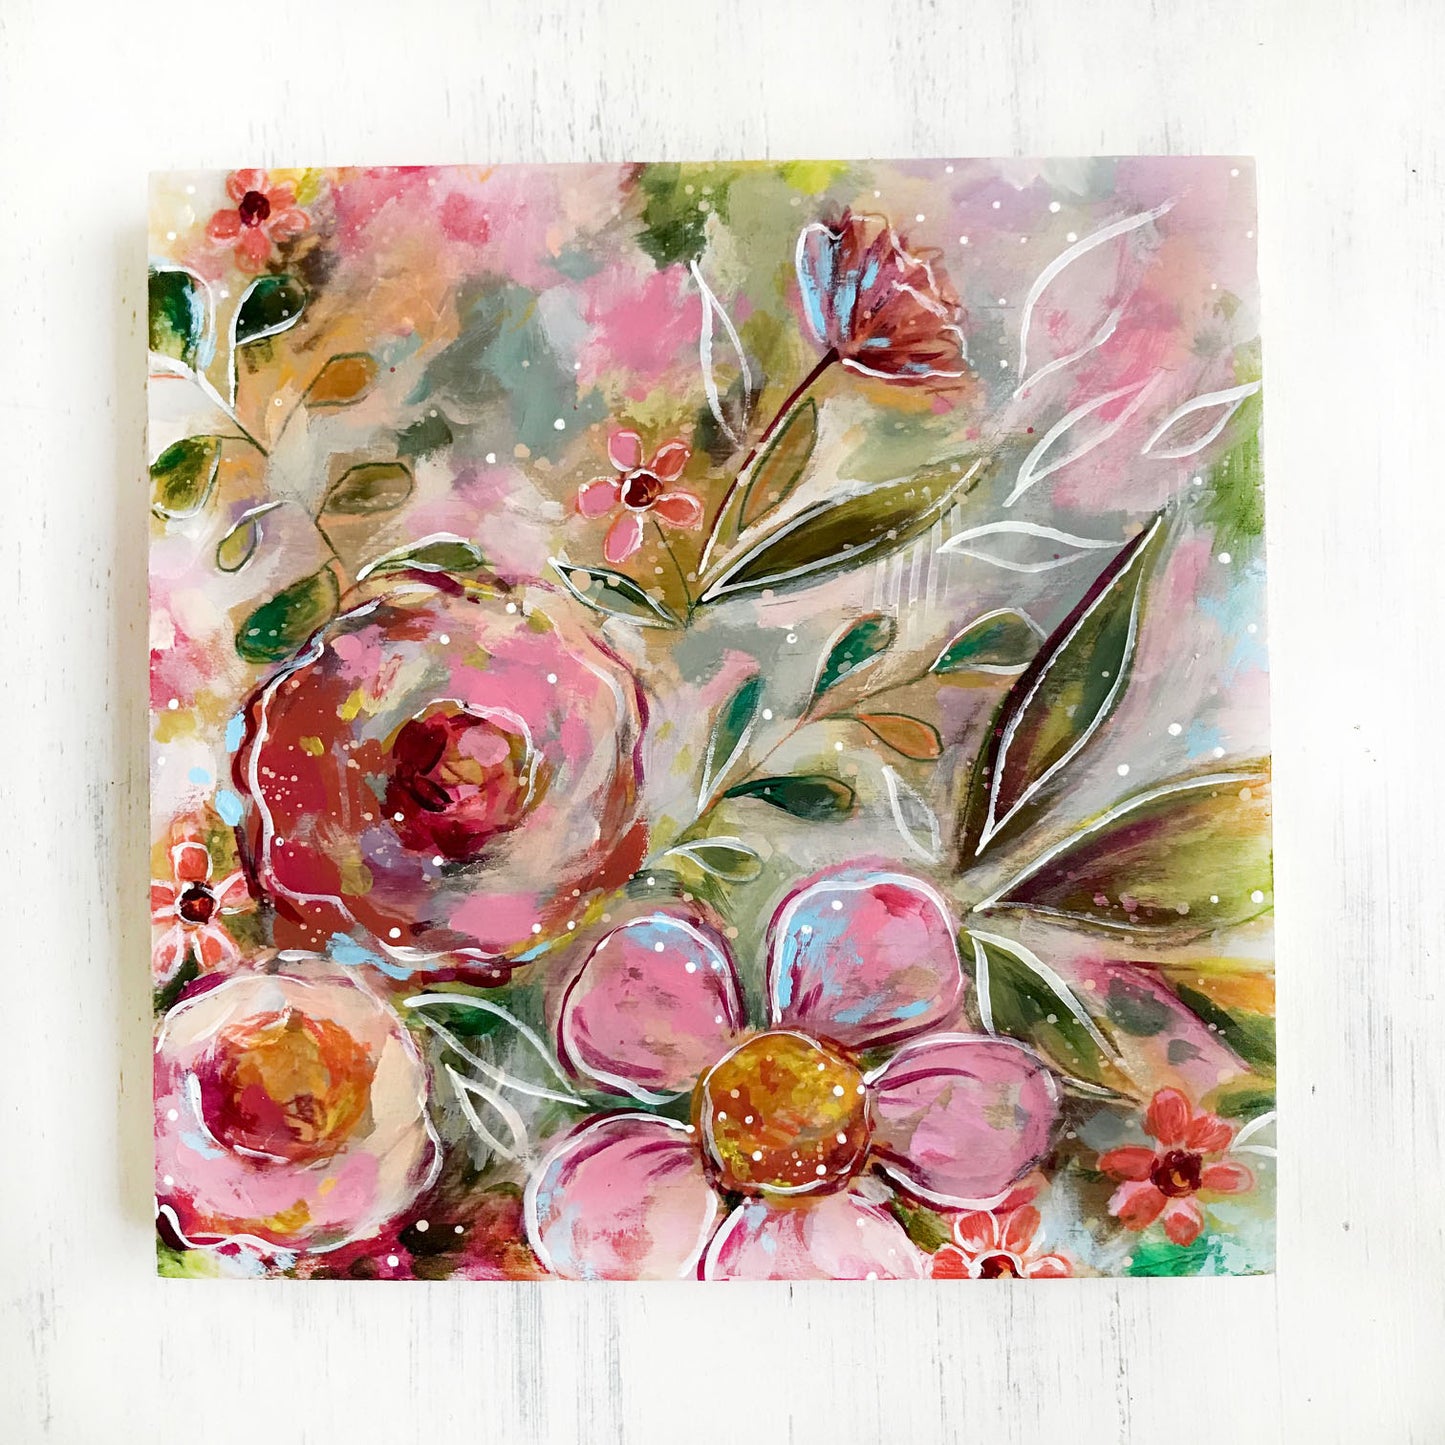 New Spring Floral Mixed Media Painting on 8x8 inch wood panel no.2 - Bethany Joy Art